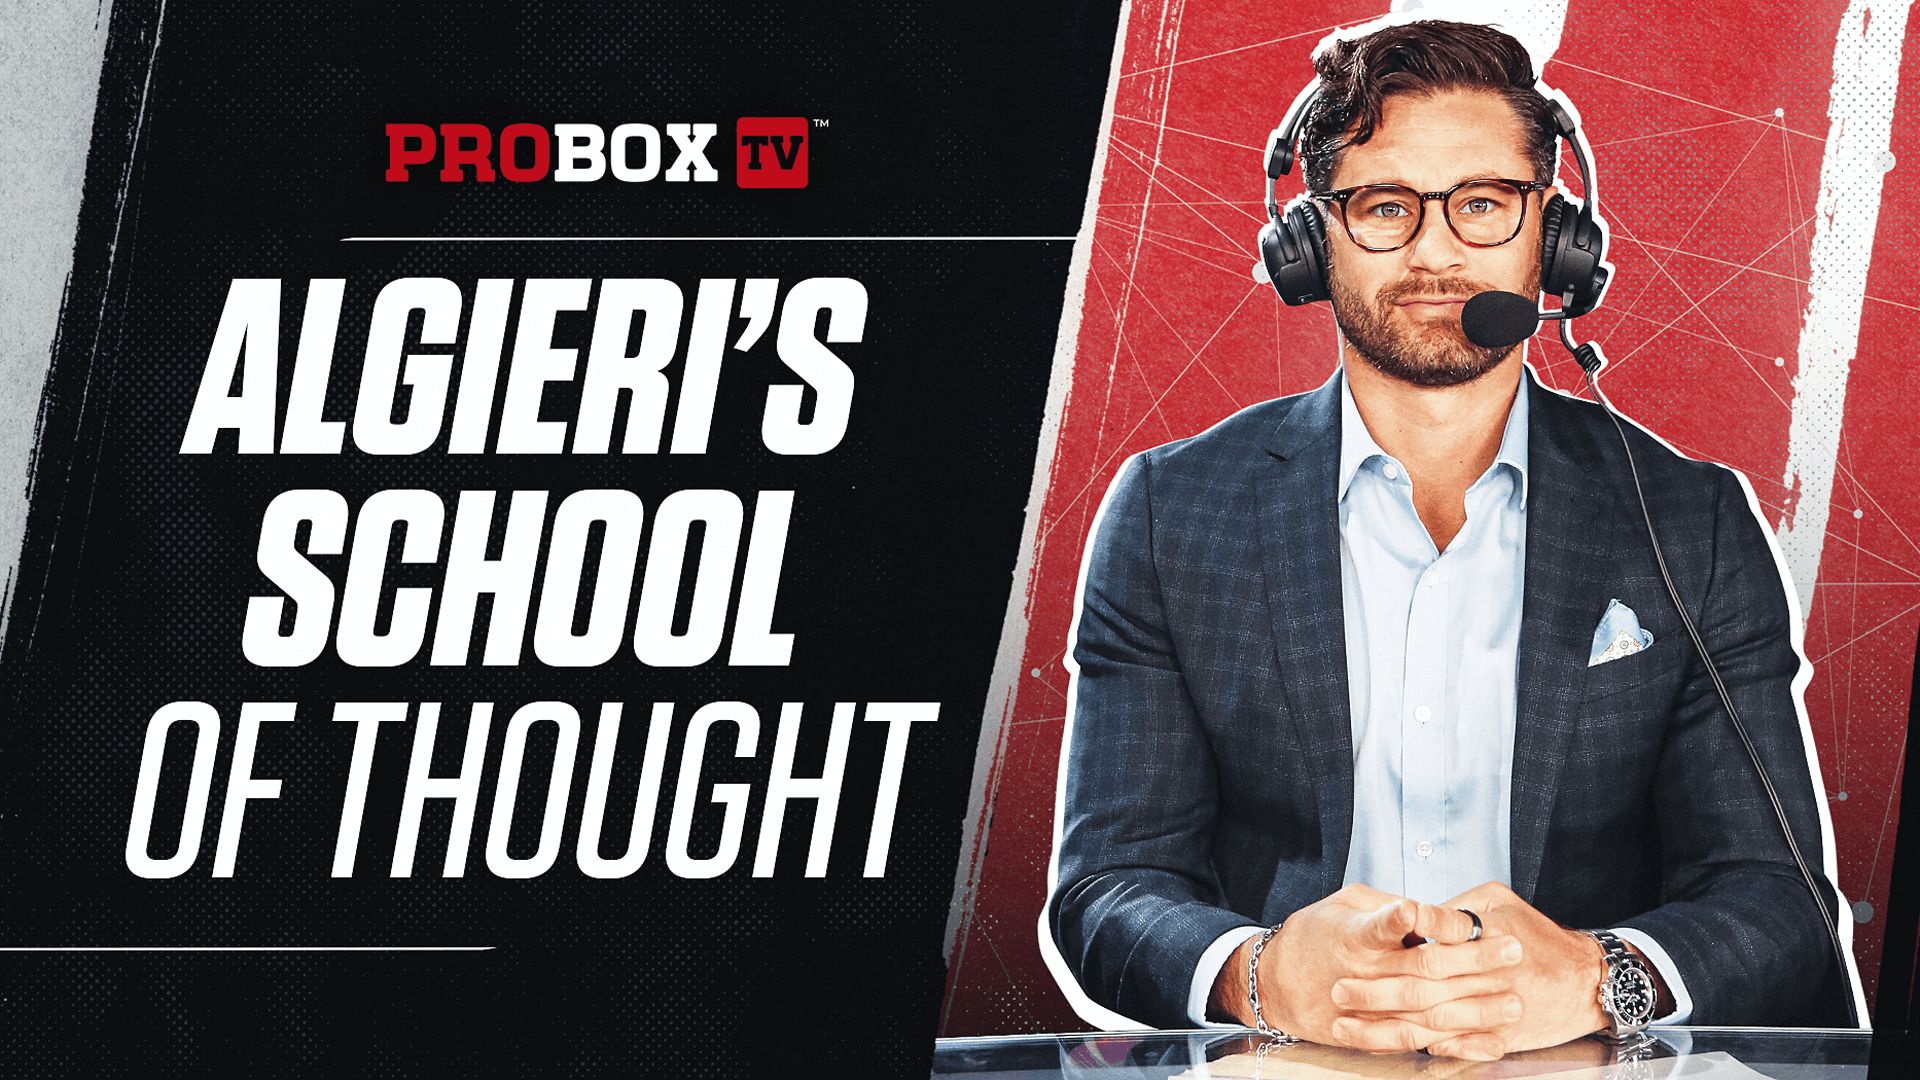 Chris Algieri's School of Thought: Like Mayweather-Pacquiao, Crawford-Spence is happening past its peak, but will be more competitive than ever